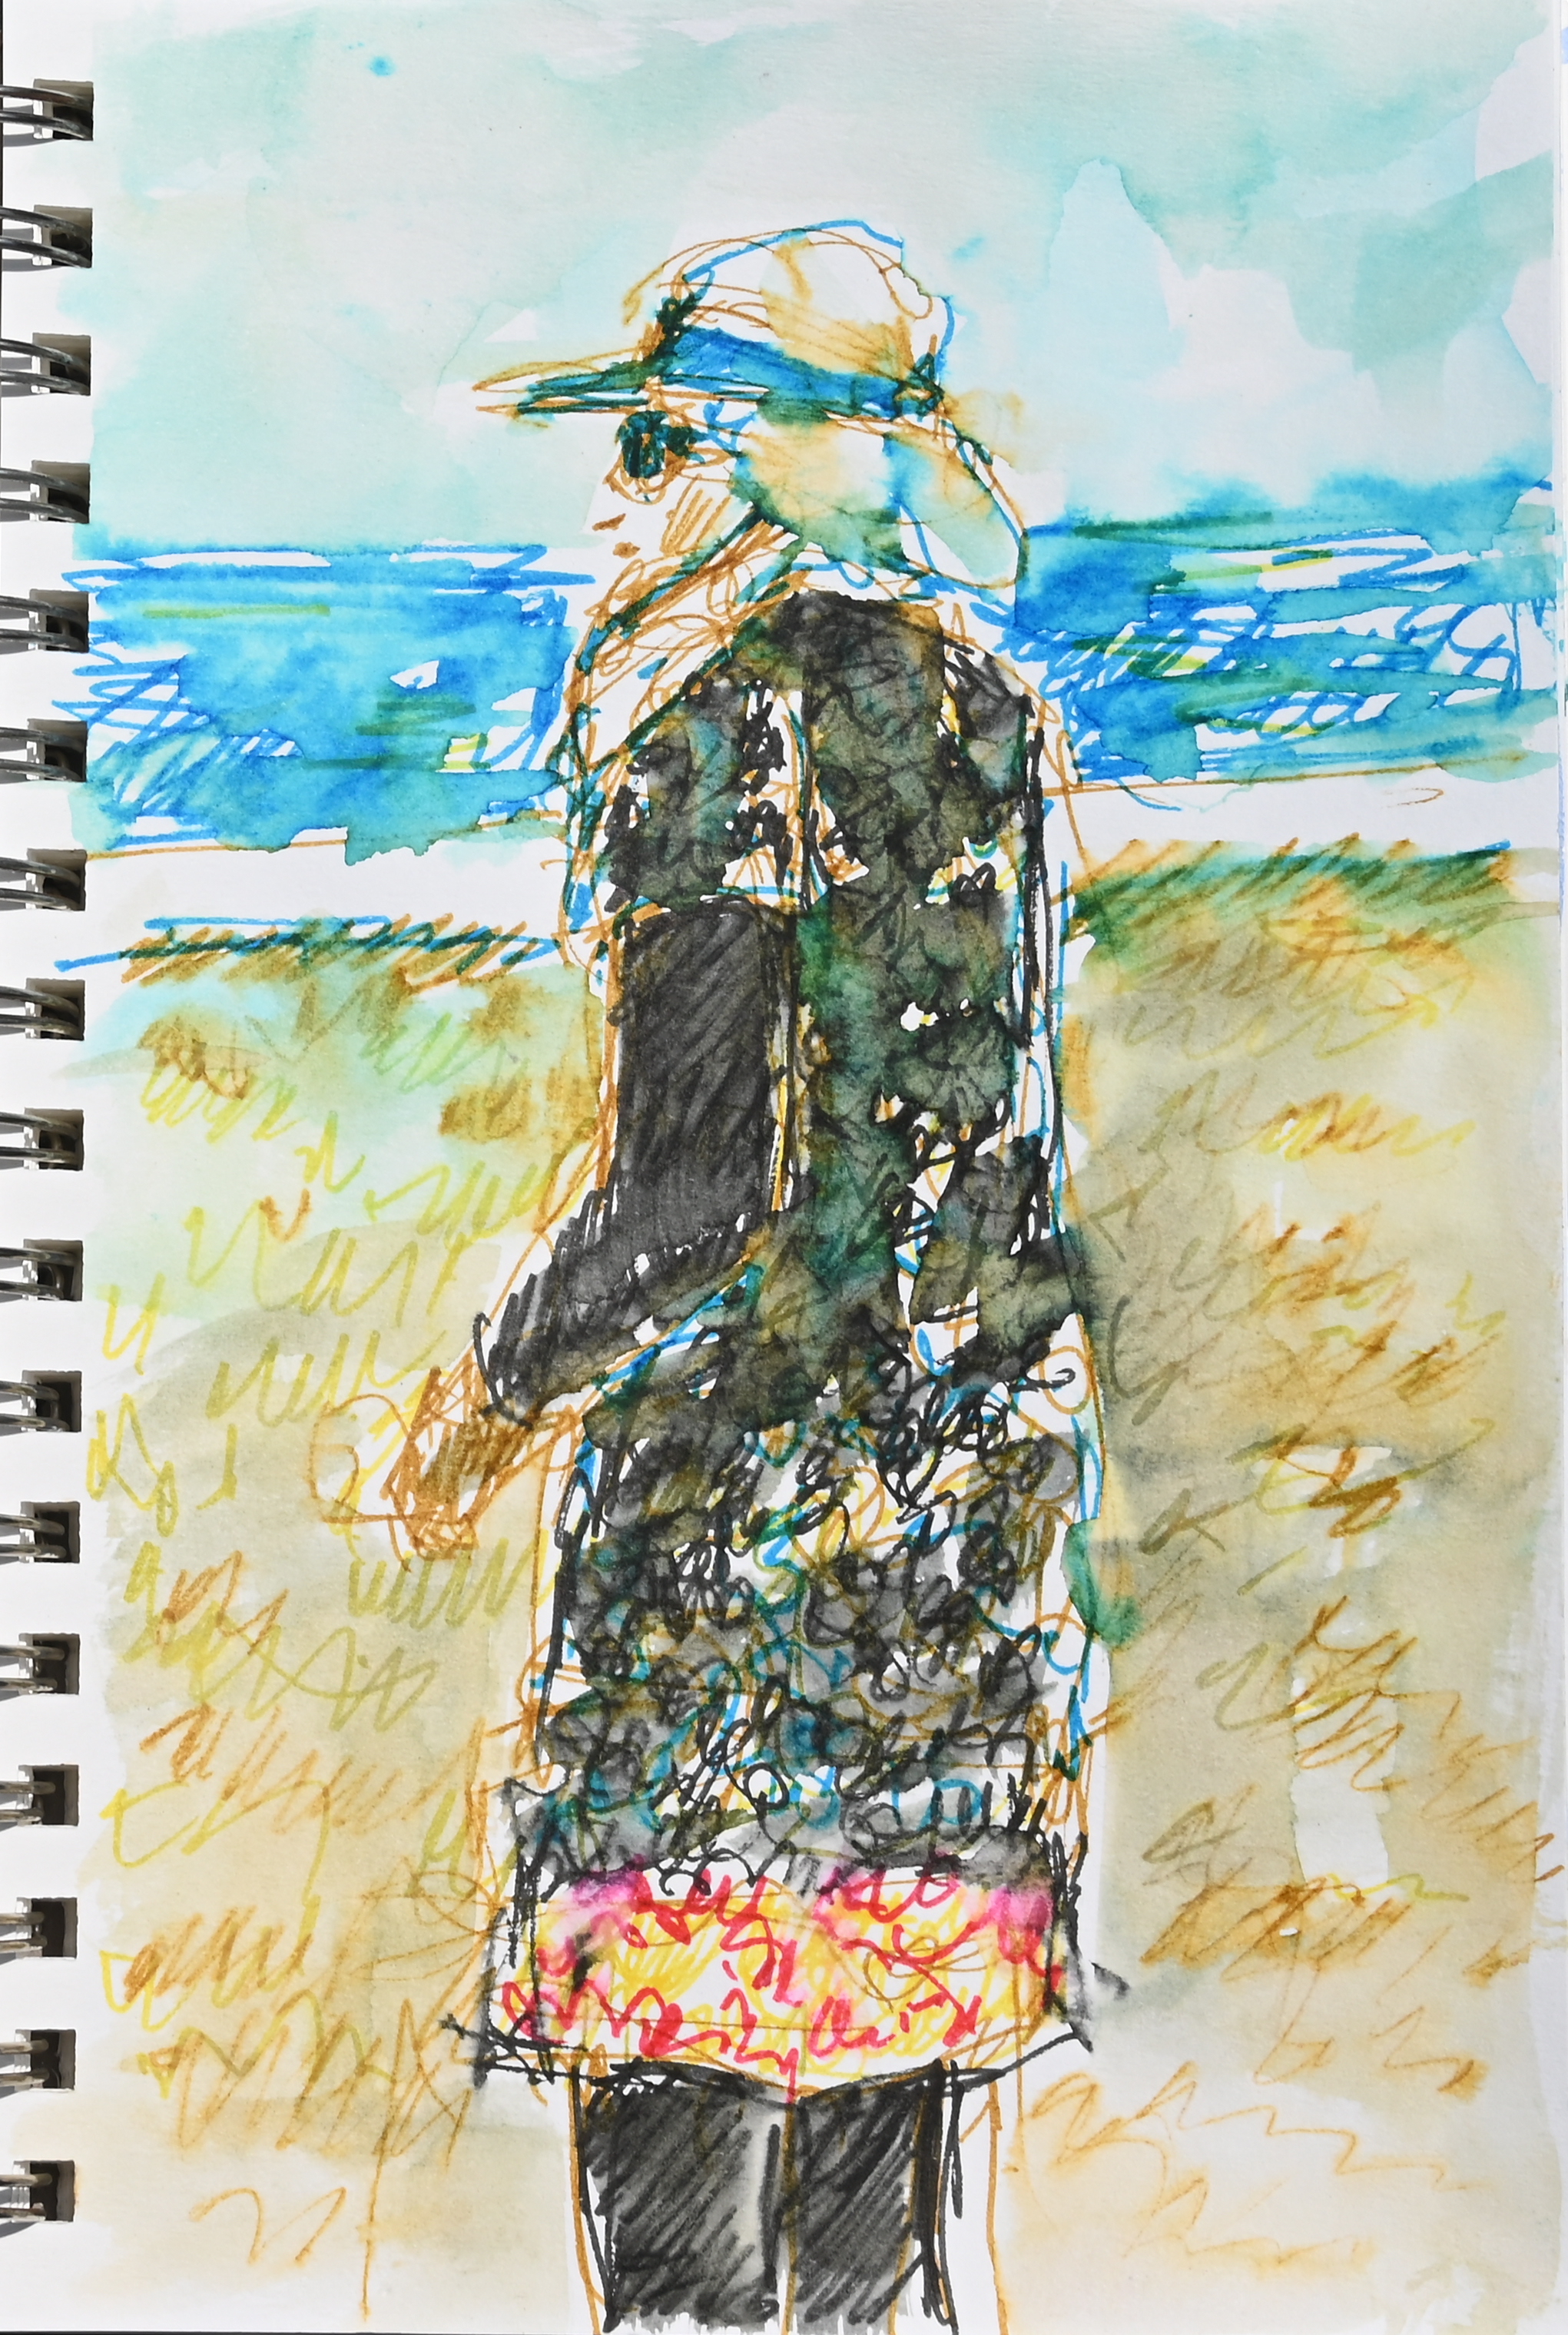 Lady at the beach, watercolor painting